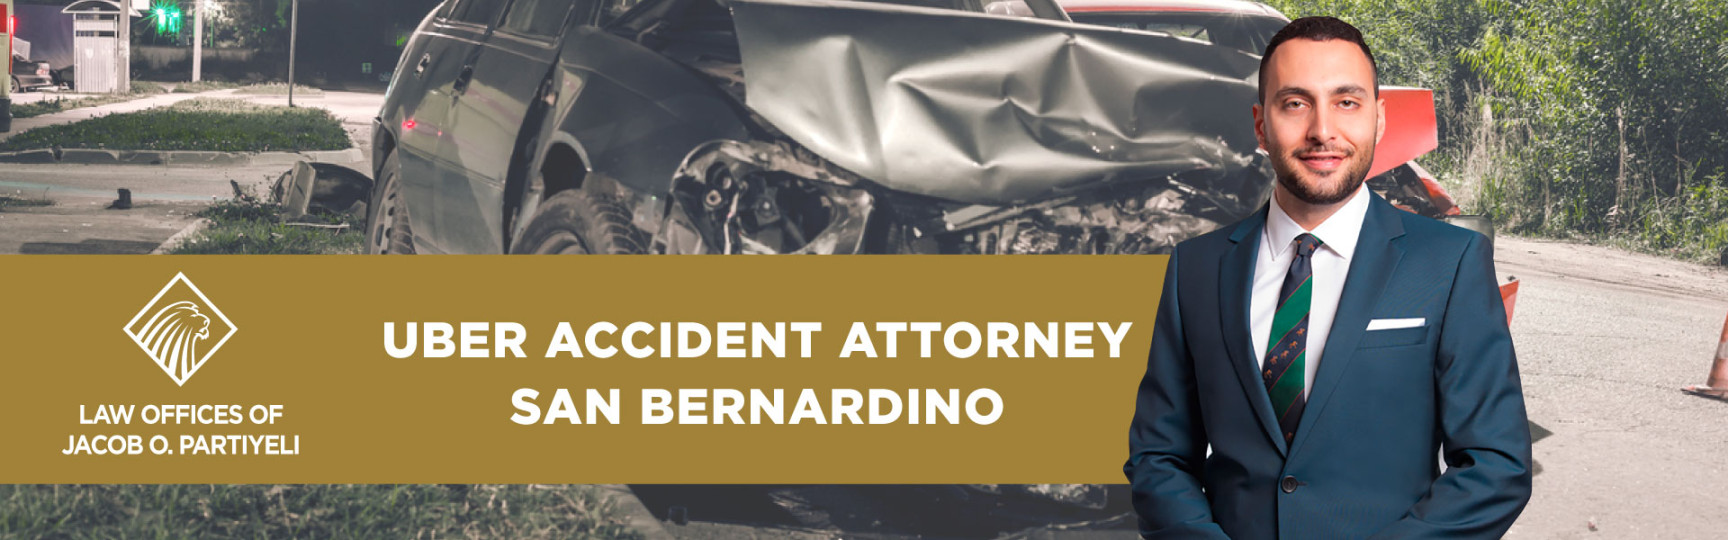 uber accident attorney near me